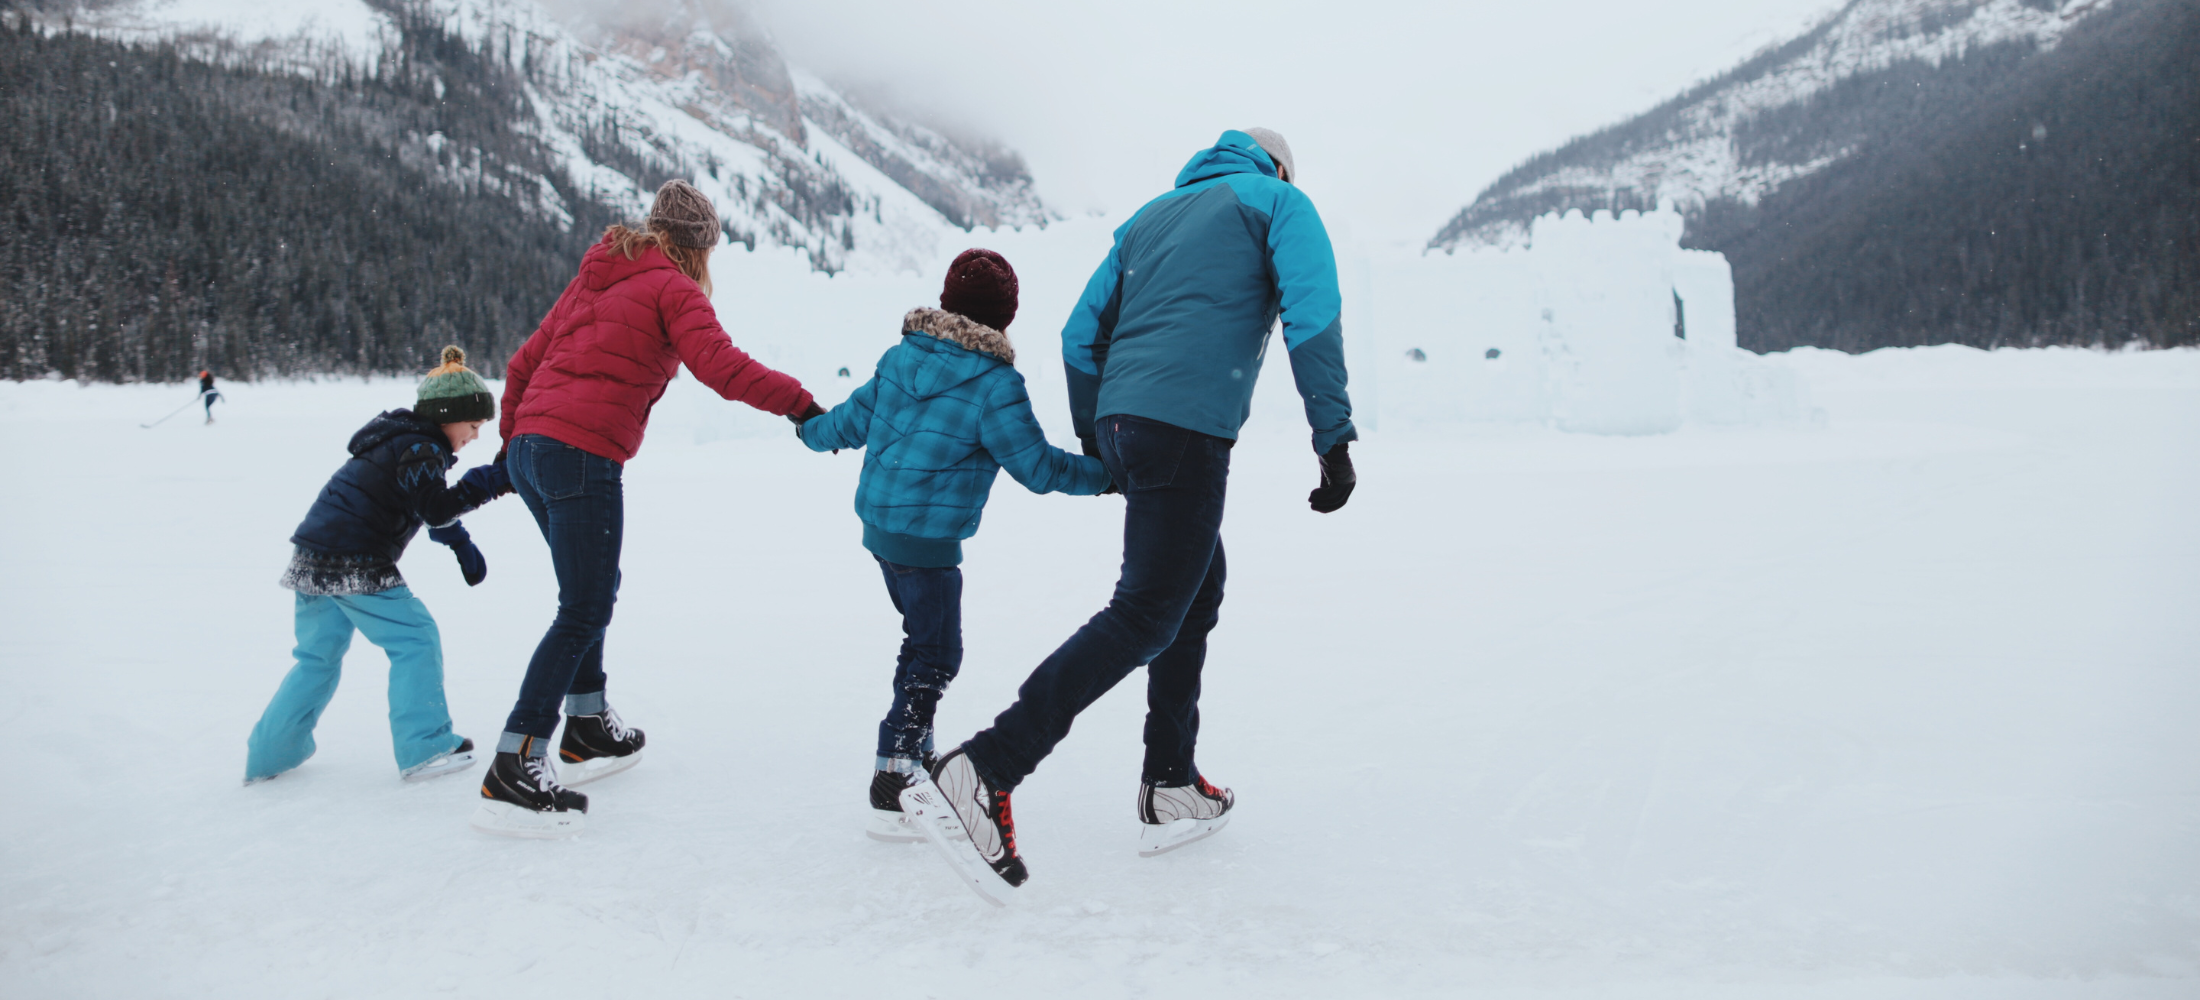 Family Winter Activities, Ice Skating on Lake Louise, photo by Travel Alberta